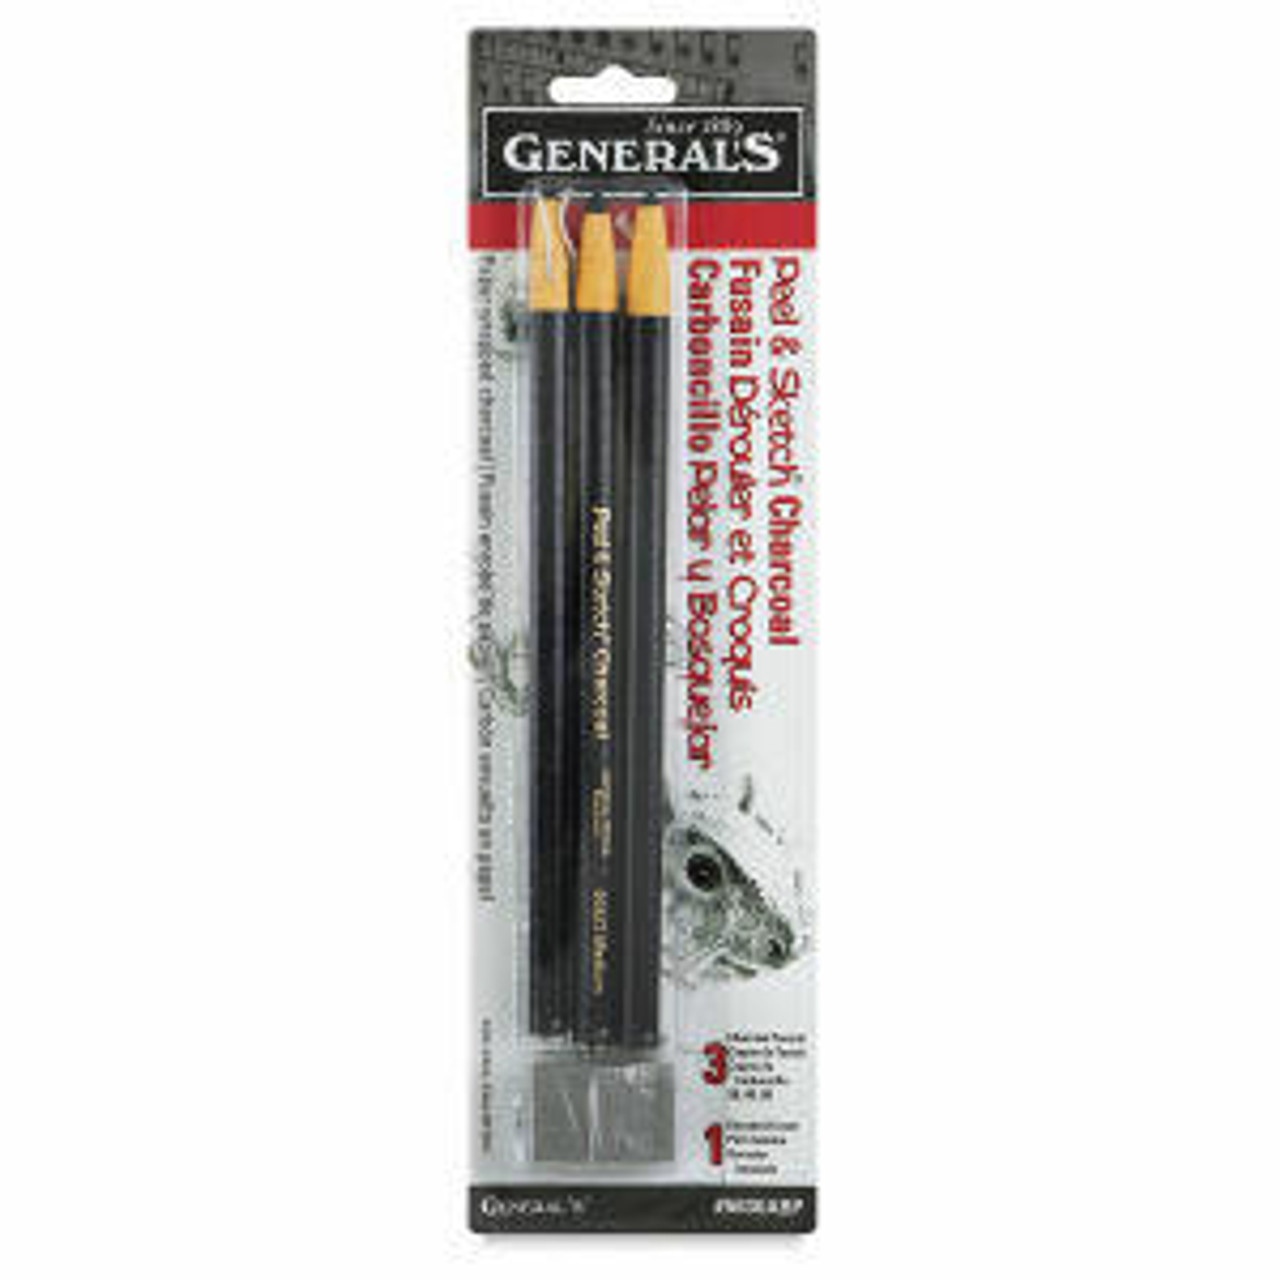 https://cdn11.bigcommerce.com/s-9uf88xhege/images/stencil/1280x1280/products/707/49575/general-pencil-co-inc-general-pencil-peel-and-sketch-charcoal-pencil-set__31820.1656603302.jpg?c=1?imbypass=on